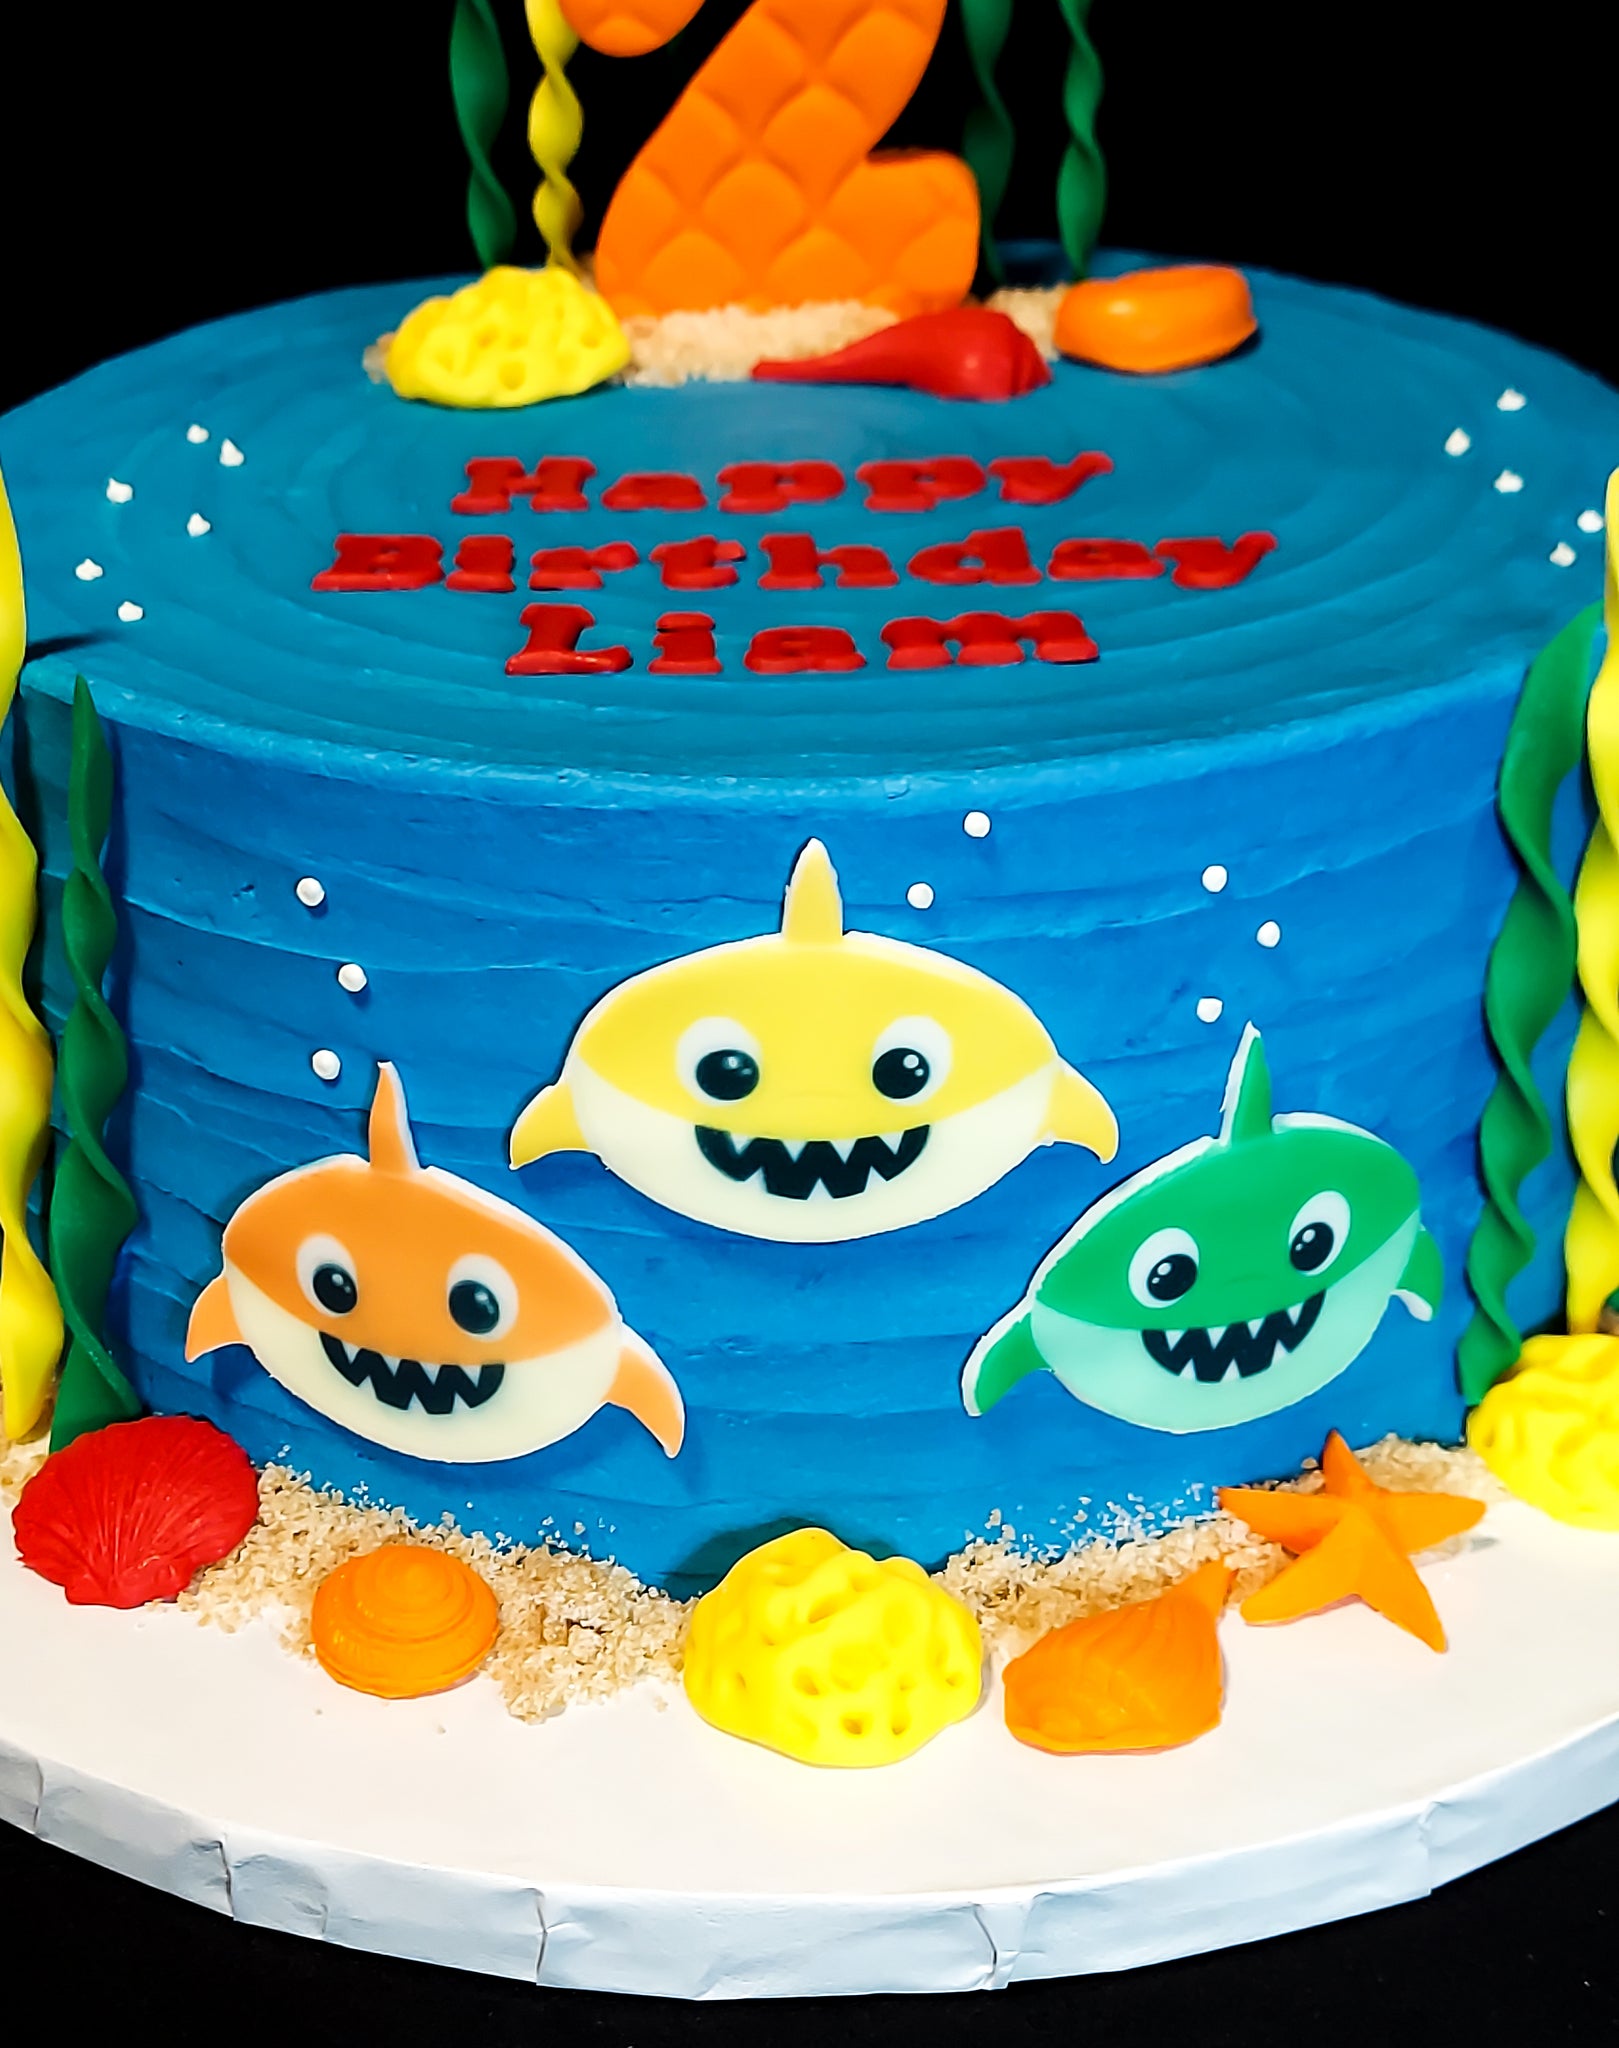 Baby Shark Themed Cake | Yours Sincerely Bakery